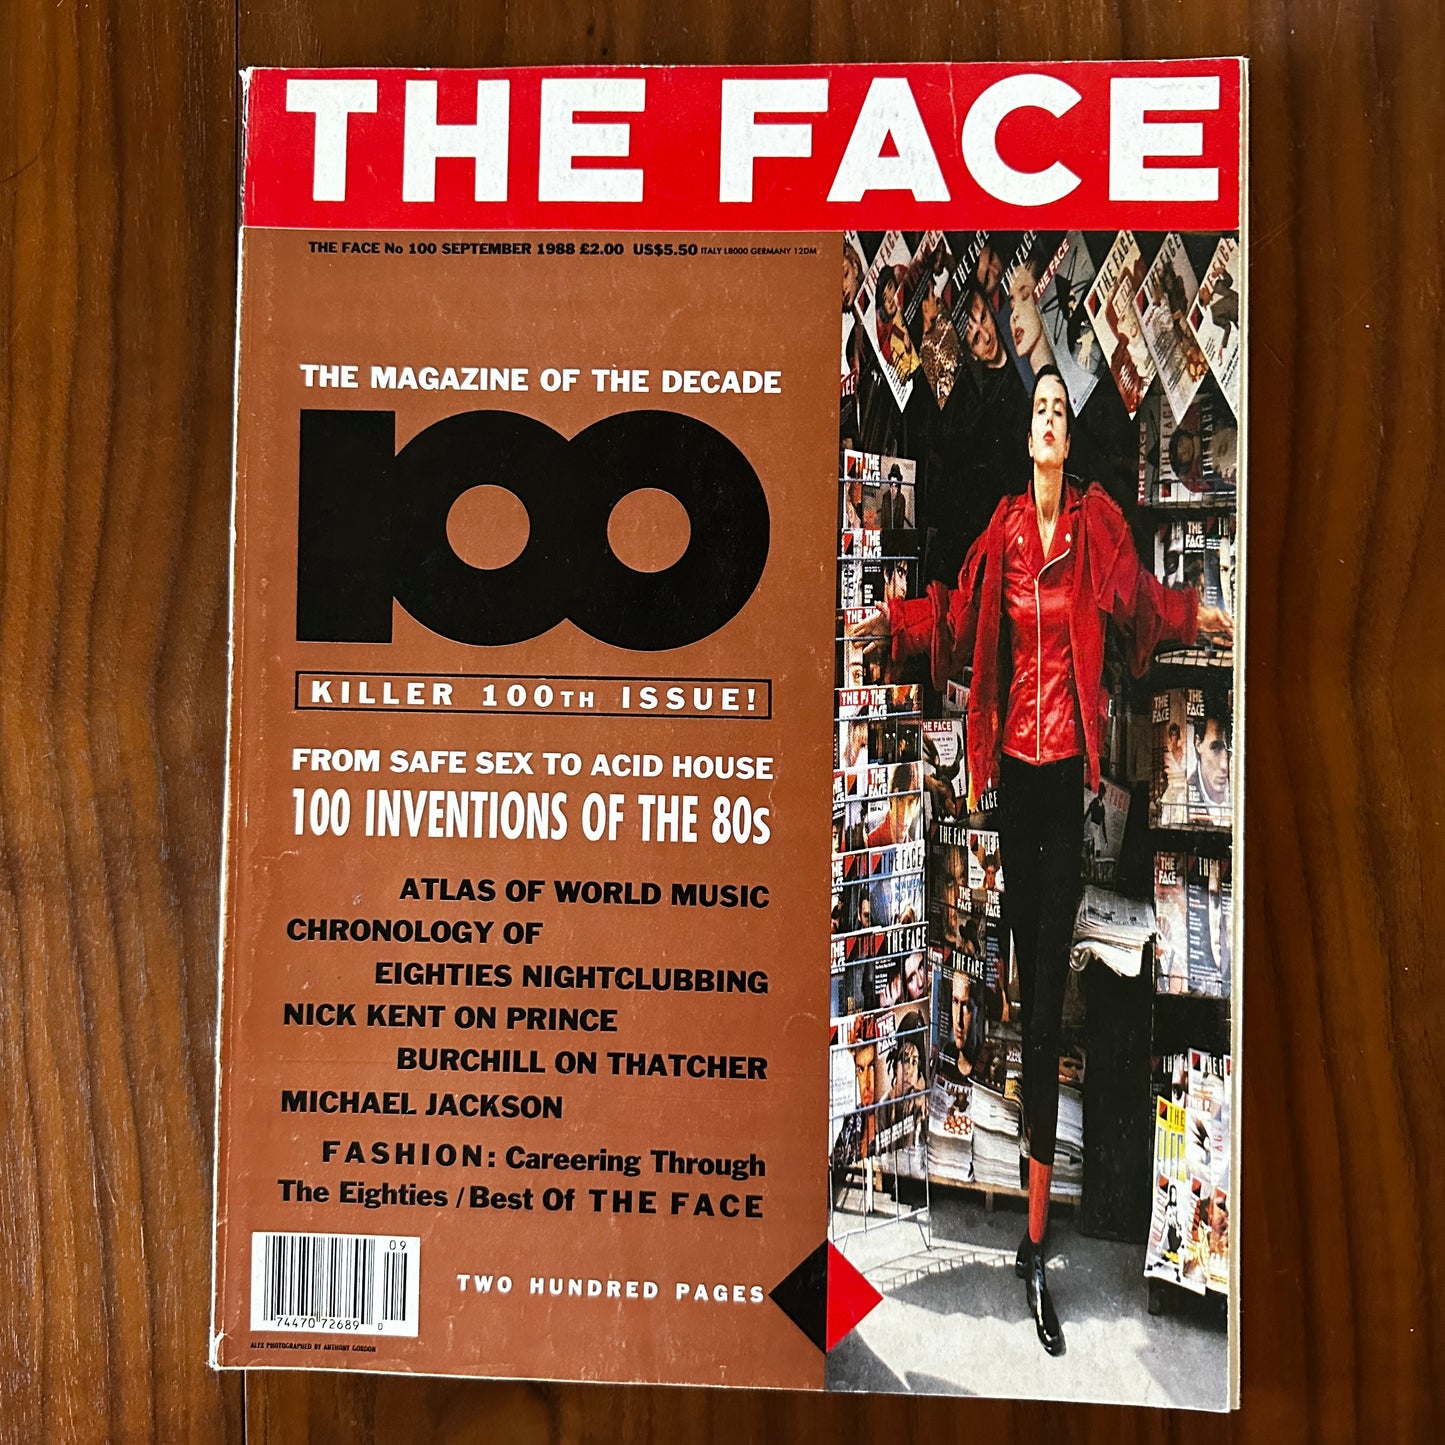 The Face Magazine UK - Special Issue No. 100  September 1988